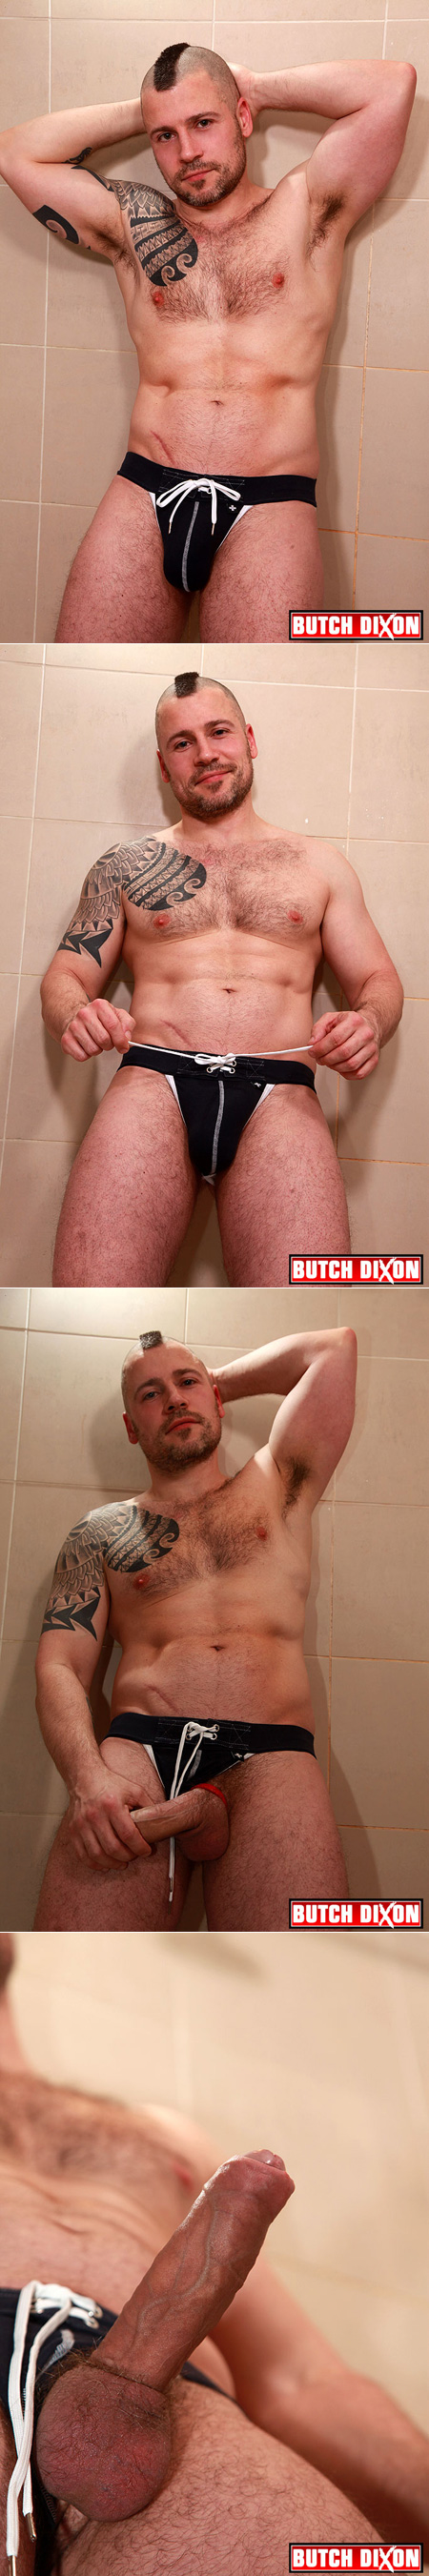 Bottom cub in a jockstrap with a veiny uncut cock.